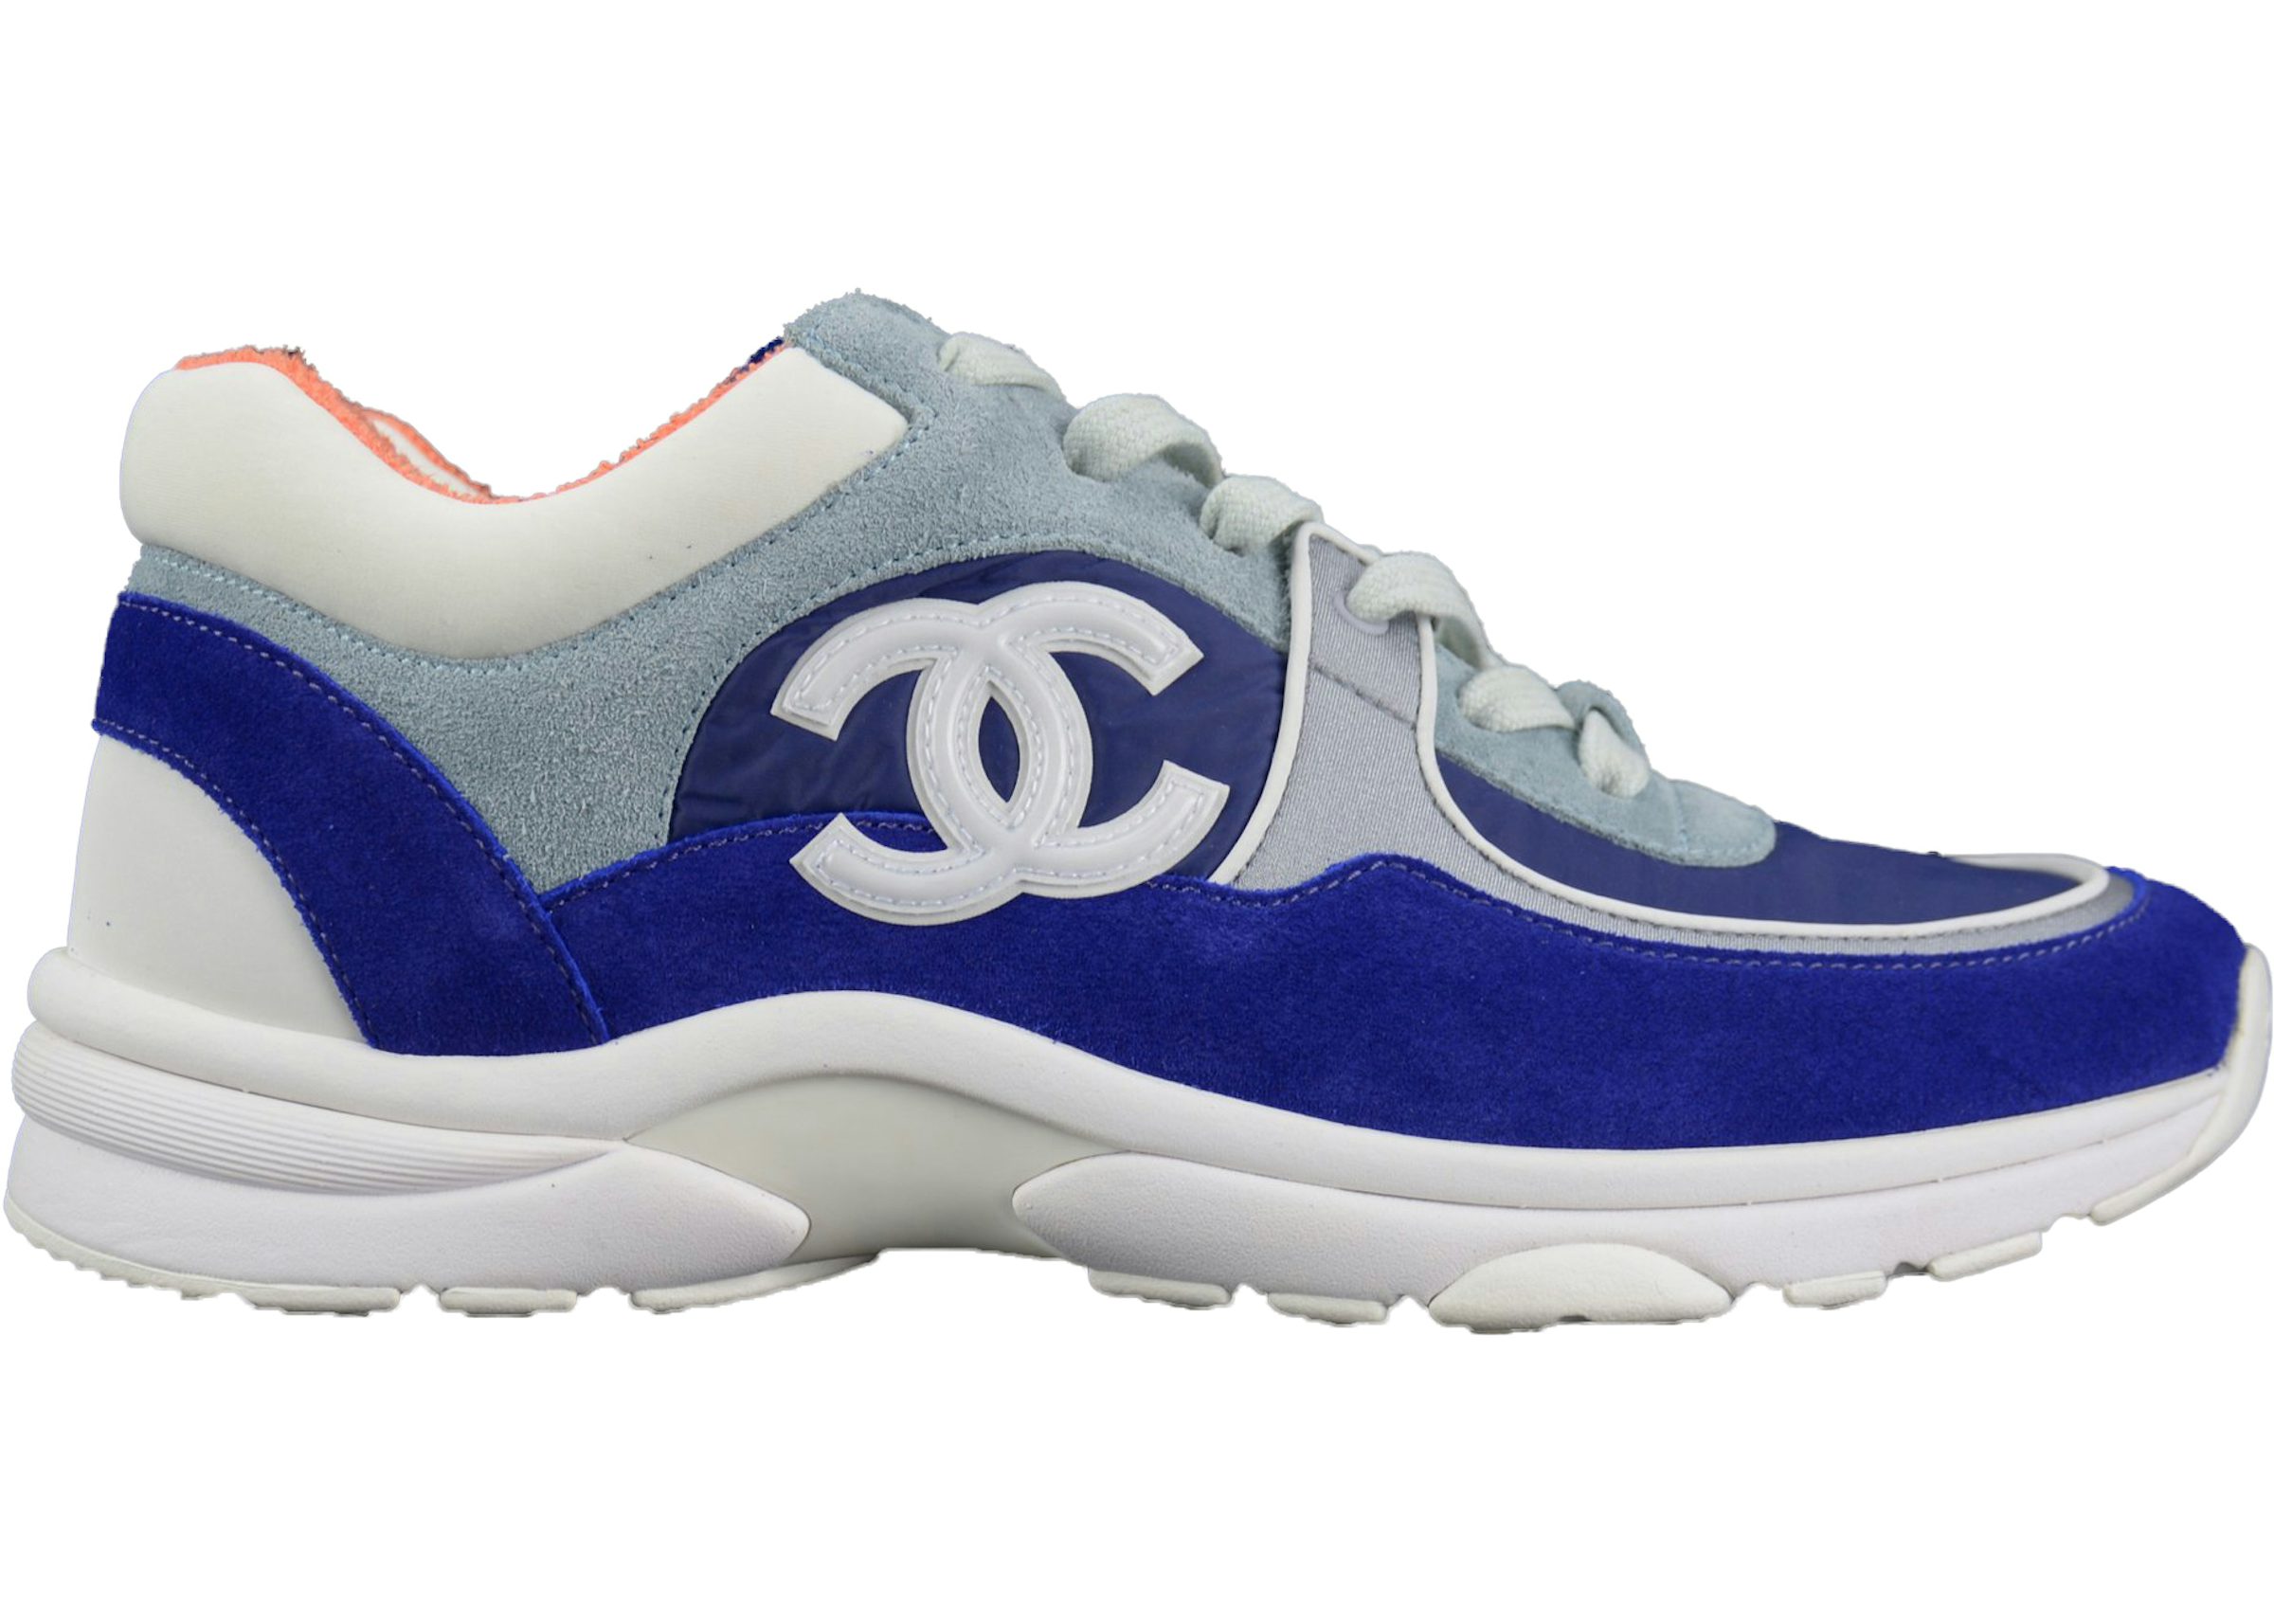 Buy Luxury Brands Chanel Shoes & New Sneakers - StockX